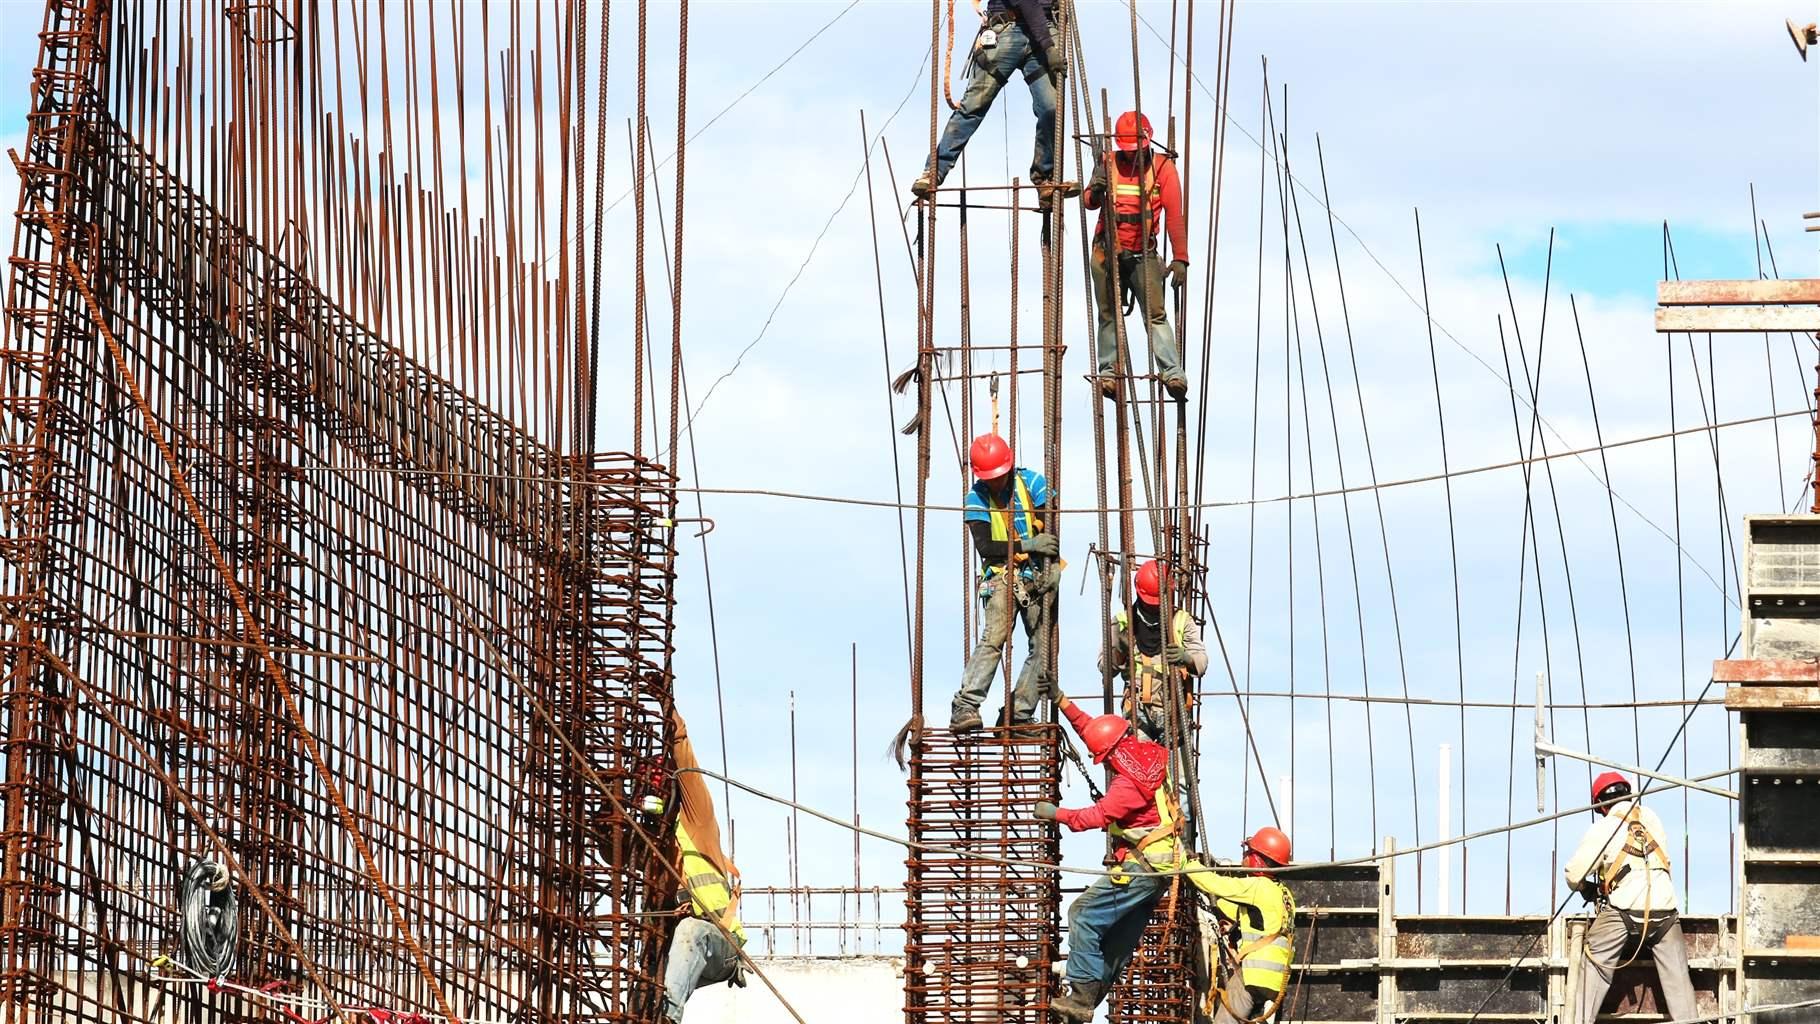 Construction workers climbing infrastructure wires